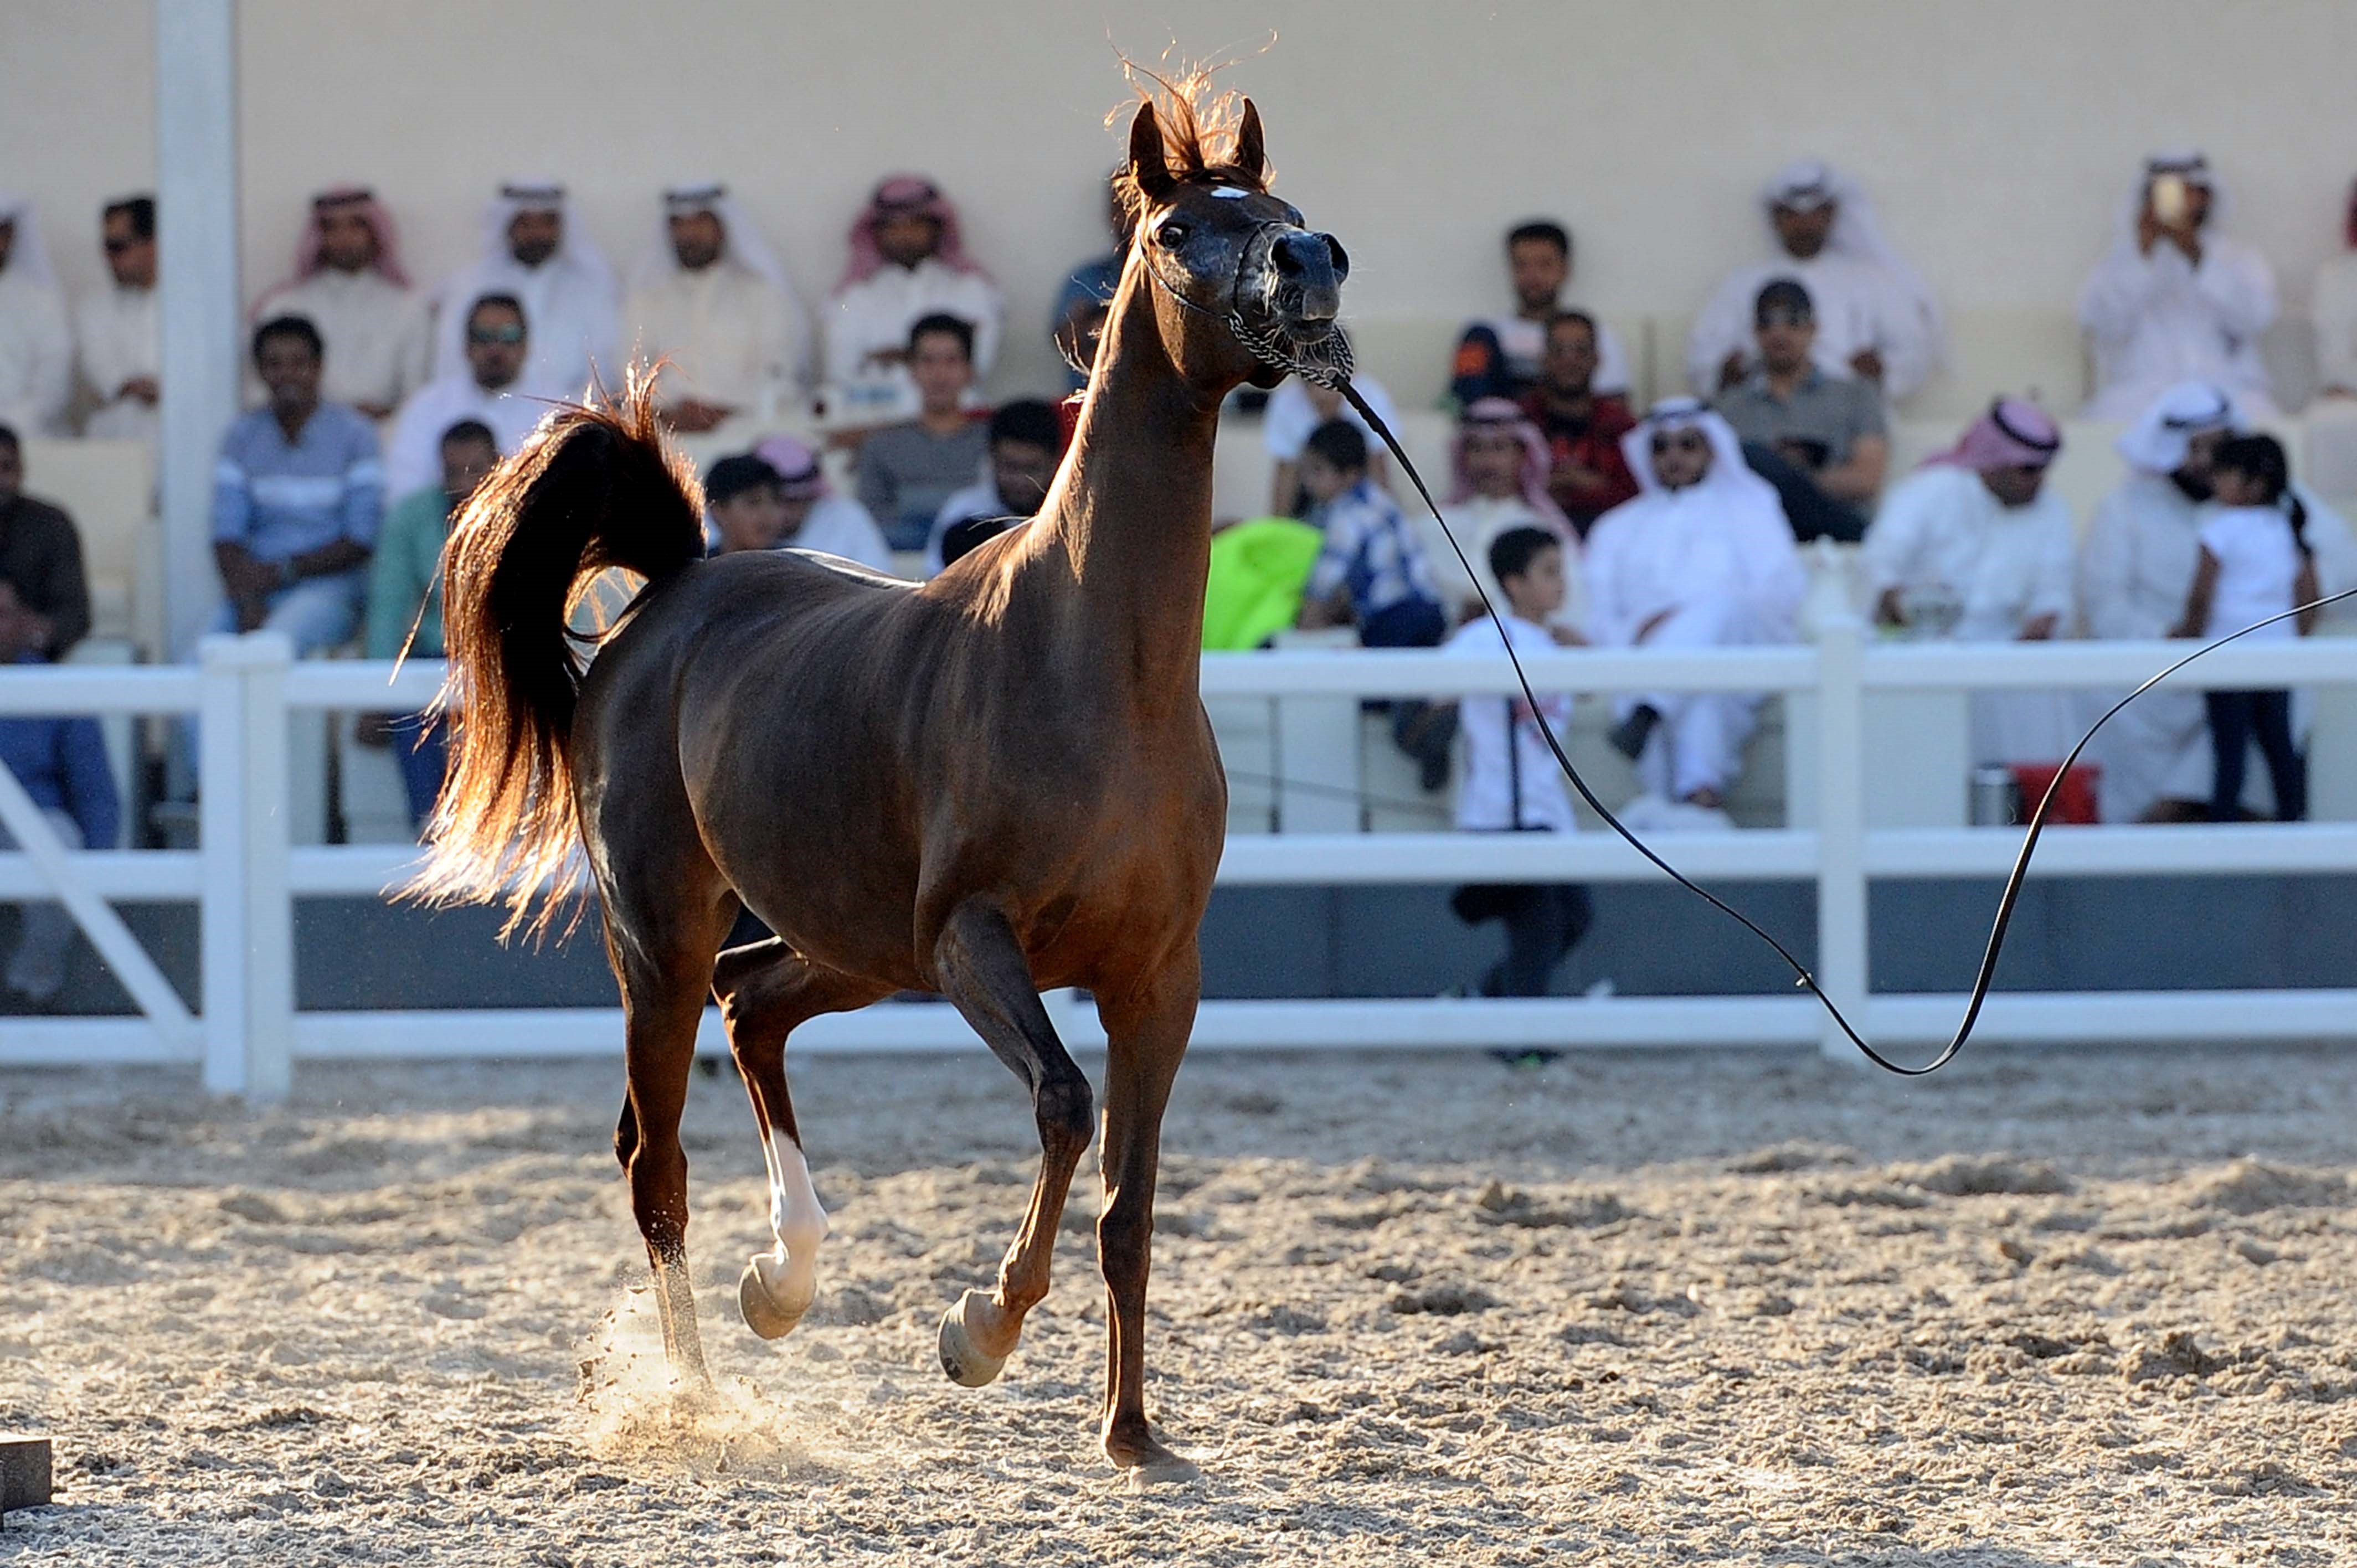 Kuwait is considered one of the most important business centers for the sale and export of Arabian horses as it exported 1,500 horses in 1816